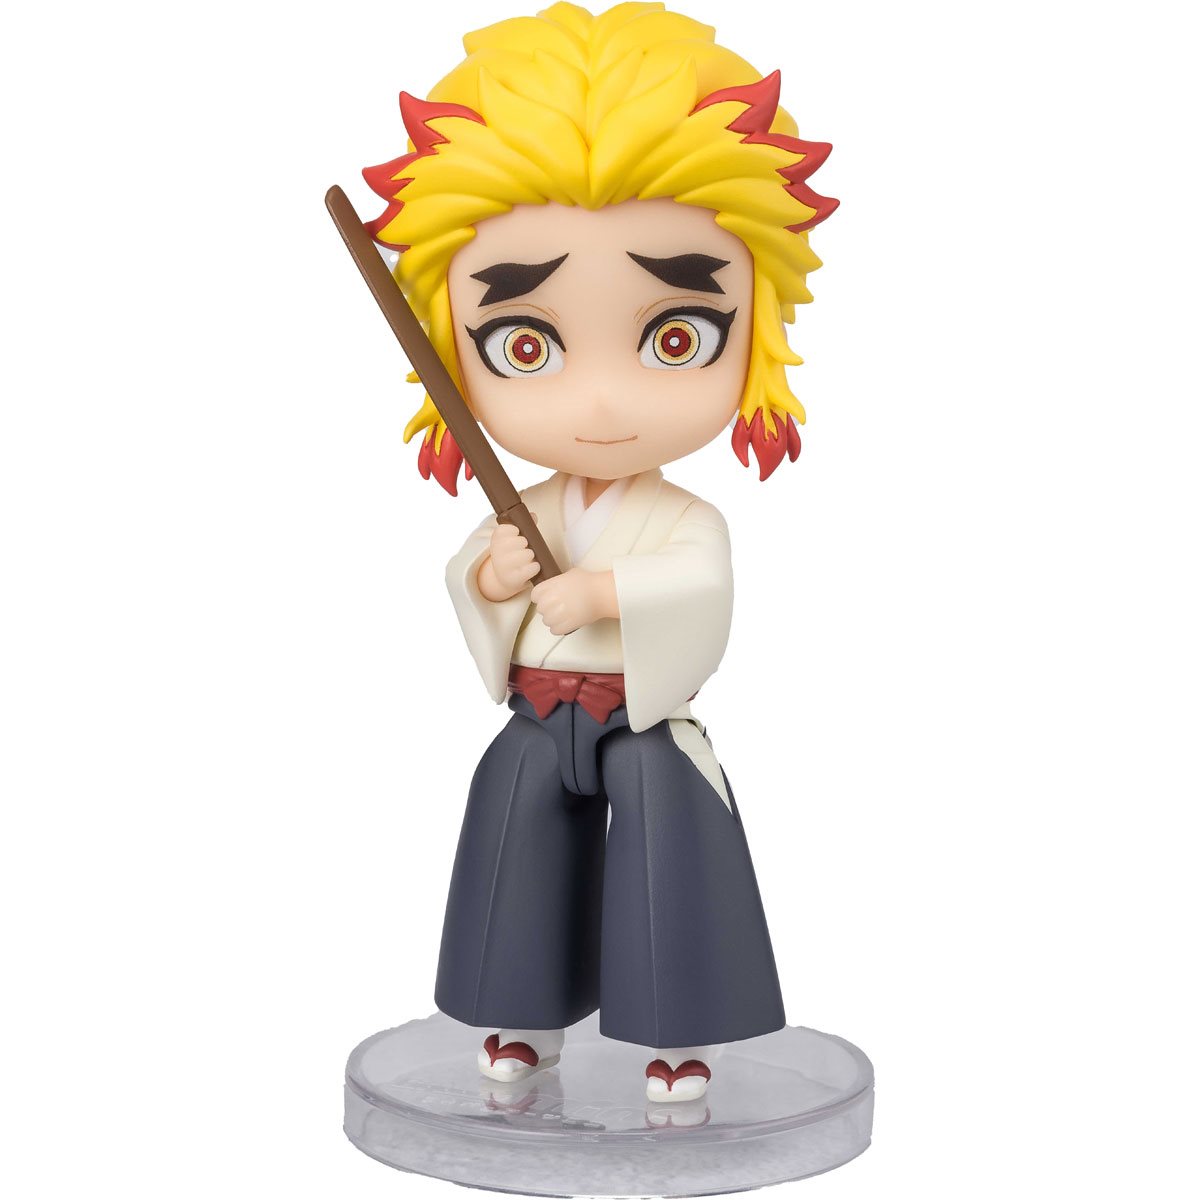 A charming Figuarts mini Senjuro Rengoku figure from Demon Slayer: Kimetsu no Yaiba standing at 3.5 inches, crafted in a unique squashed proportion style. Includes two interchangeable arms and a display stand.